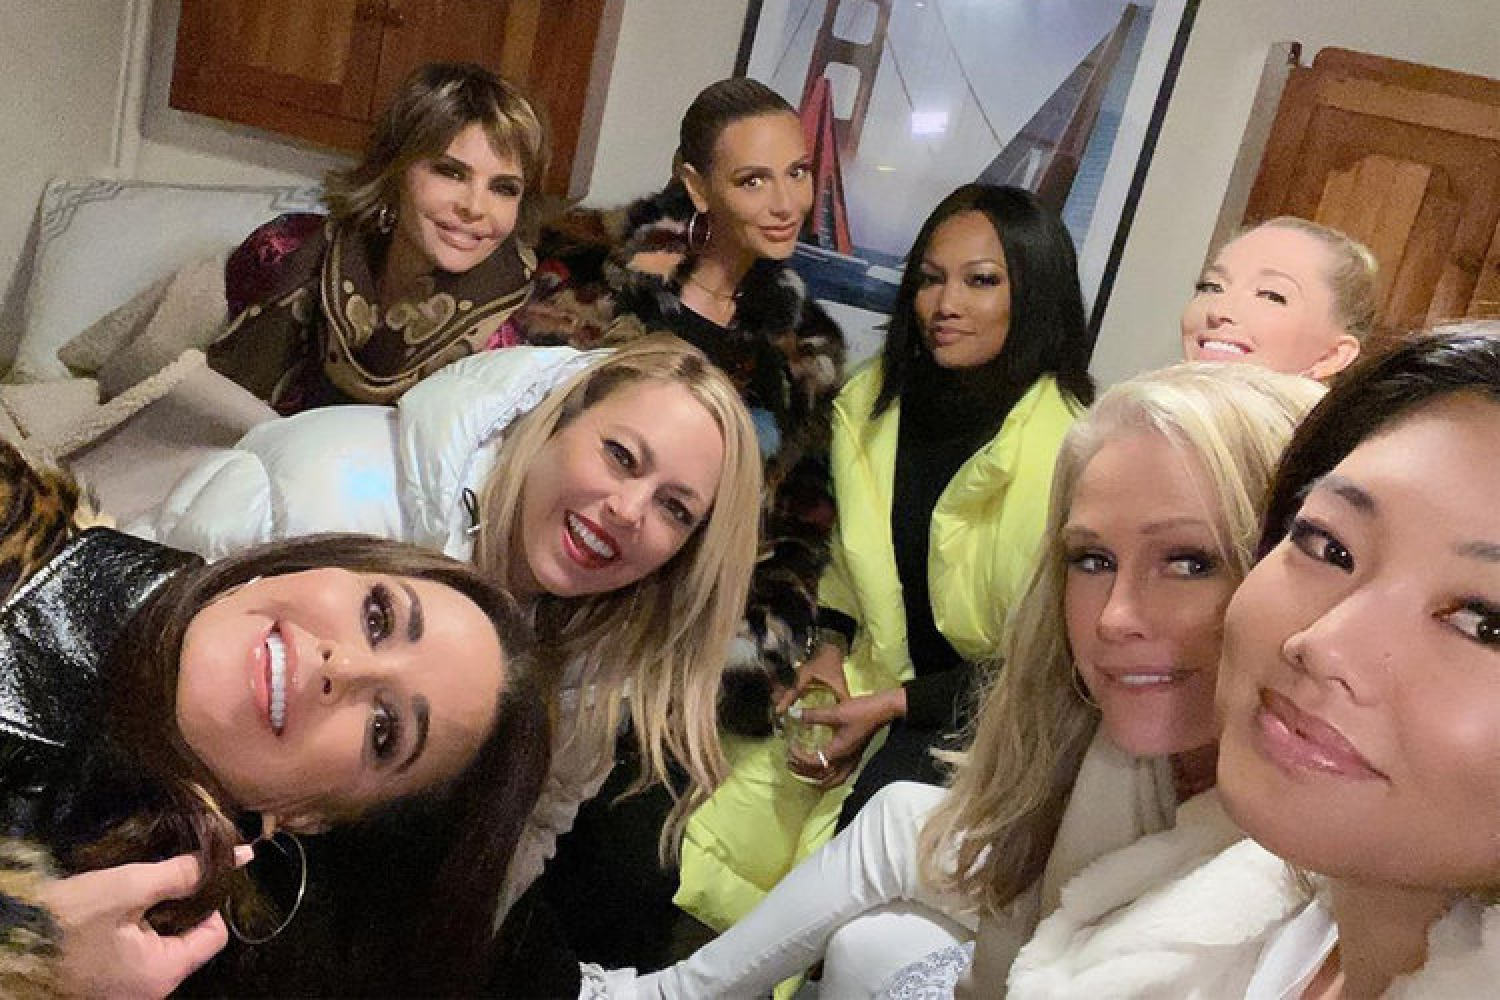 Is Kathy Hilton 'jealous' of Kris Jenner and the Kardashians? The reality  TV matriarchs, compared: both are Hollywood royalty with famous daughters  Kim and Paris, but who has the highest net worth?